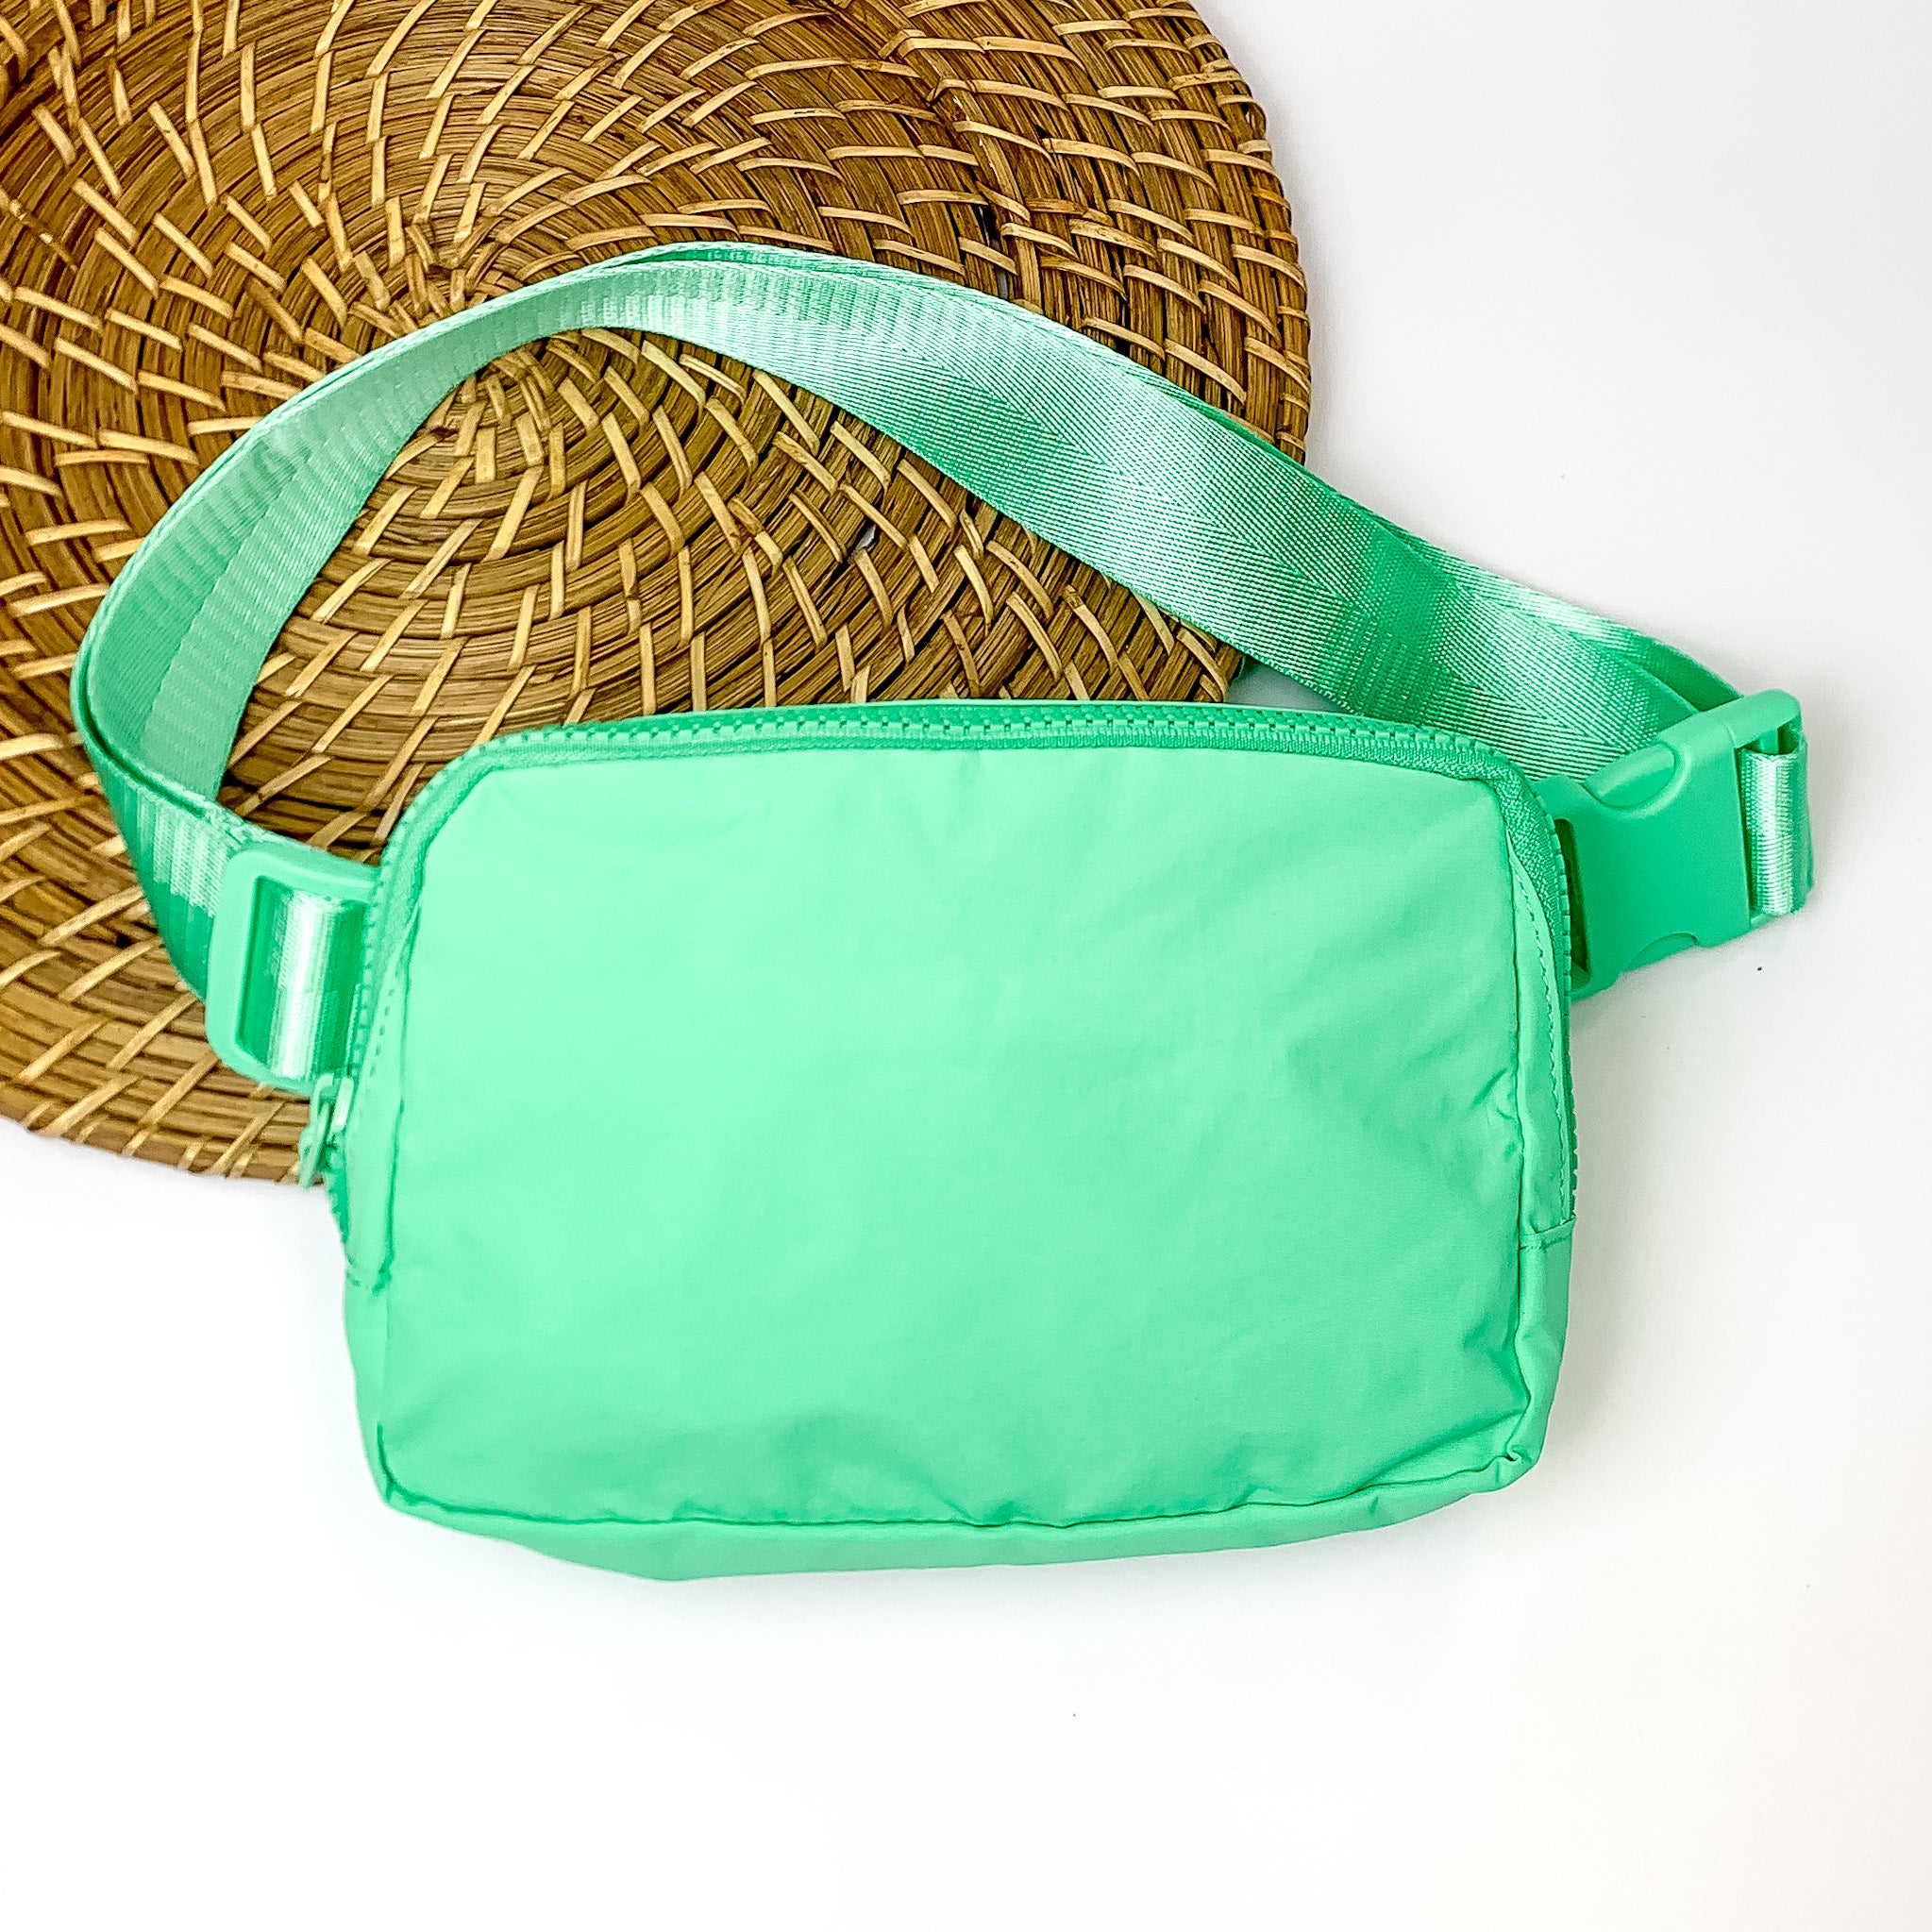 Pictured is a rectangle fanny pack with a top zipper with tassel in turquoise. This bag also includes a turquoise strap and turquoise accents. This bag is pictured on a white and brown patterned background.